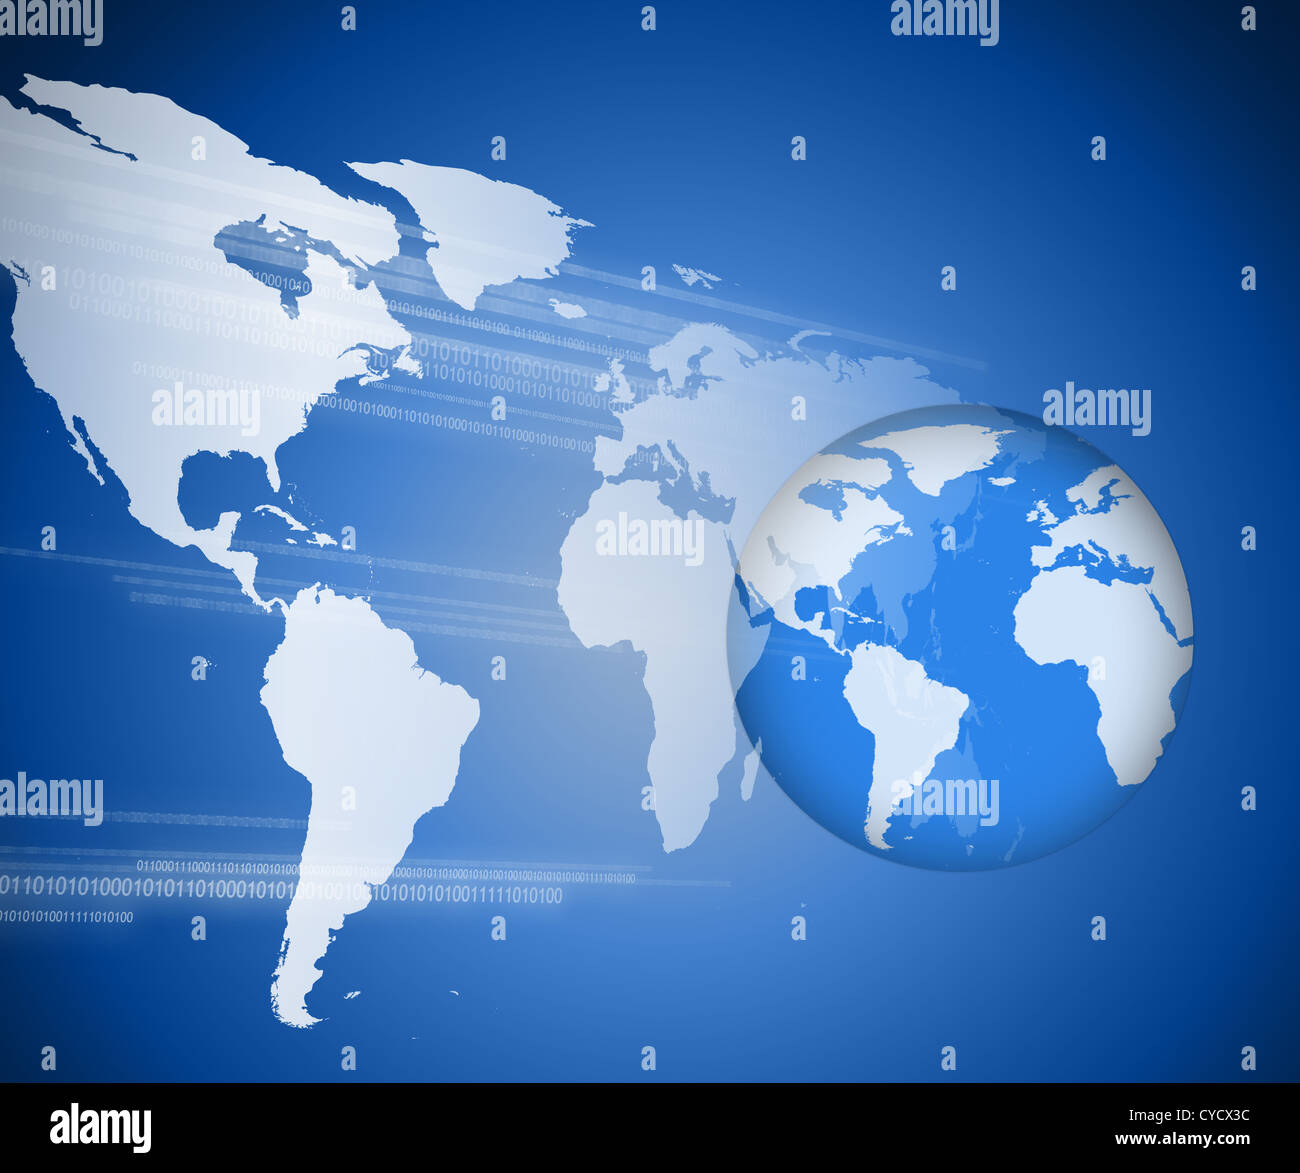 Planet earth on world map background Stock Photo